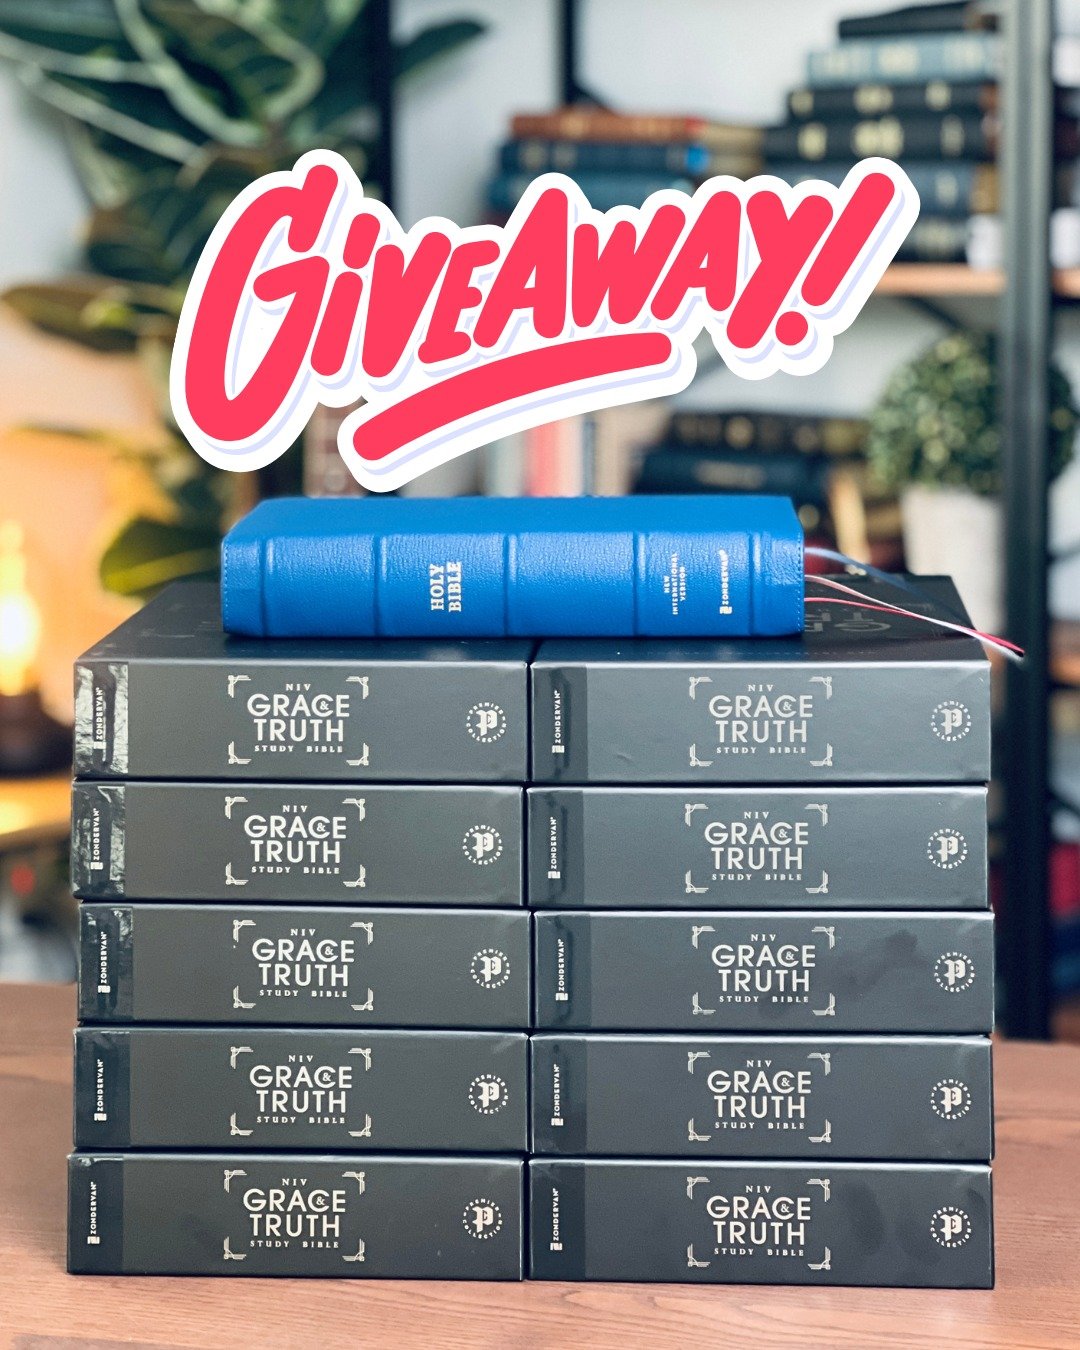 GIVEAWAY ALERT 🚨 I'm giving away TEN copies of the Premier Collection NIV Grace &amp; Truth Study Bible the month! 😮⤵️ Follow the steps below to enter to win!

1️⃣ Like this post. &hearts;️
2️⃣ Follow @timwildsmith ✅
3️⃣ Leave a comment. 💬

✳️ BON